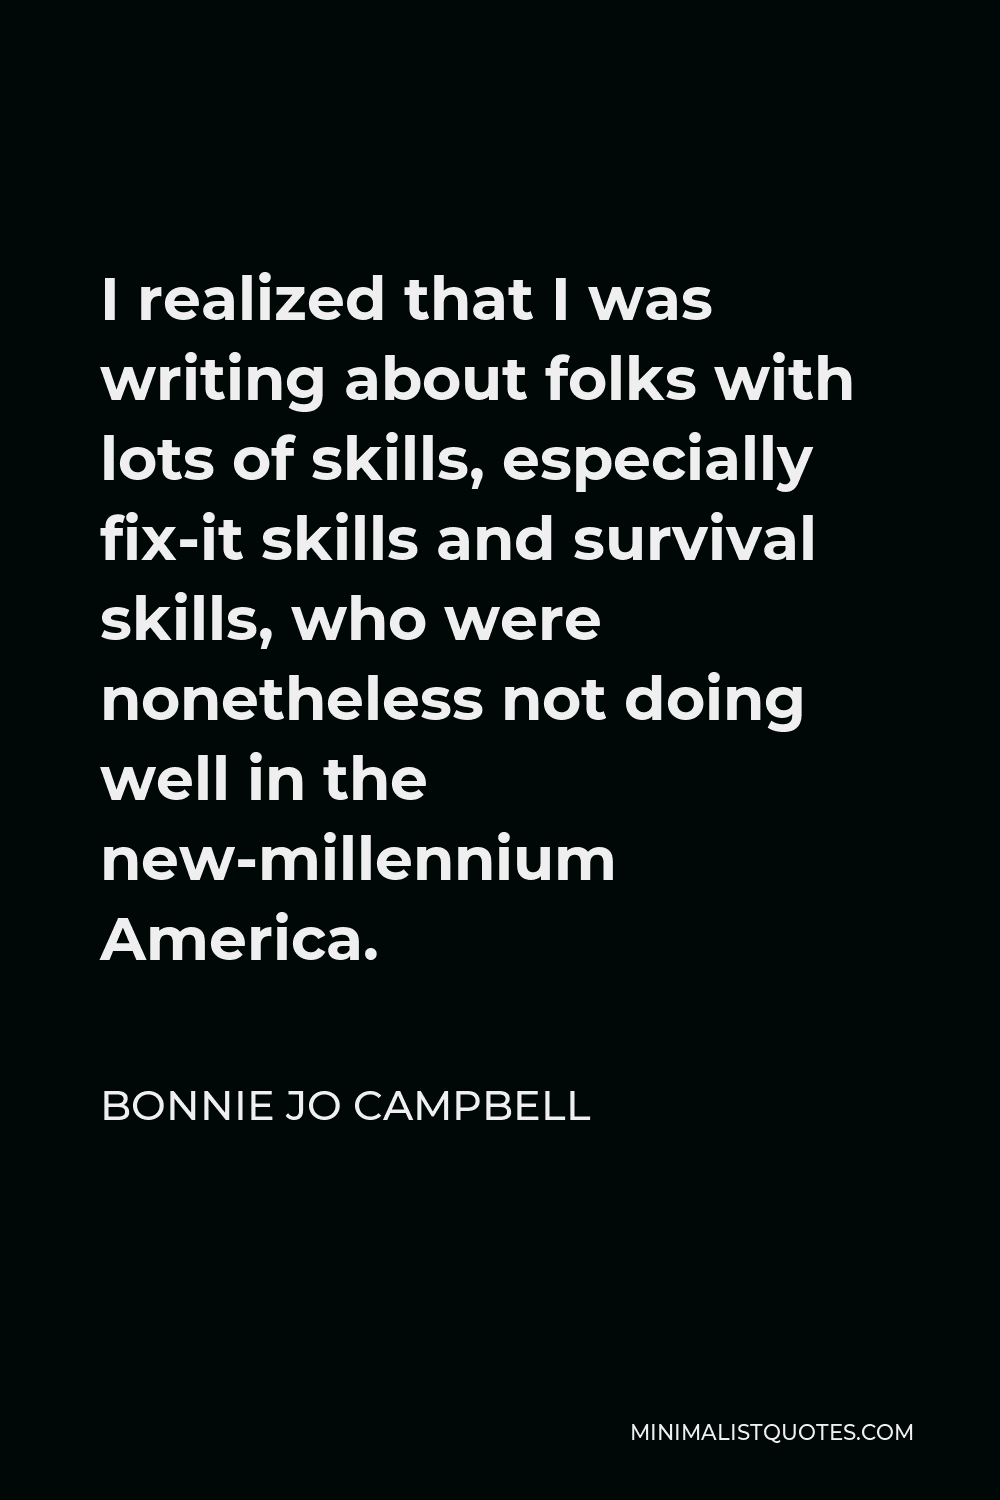 Bonnie Jo Campbell Quote - I realized that I was writing about folks with lots of skills, especially fix-it skills and survival skills, who were nonetheless not doing well in the new-millennium America.